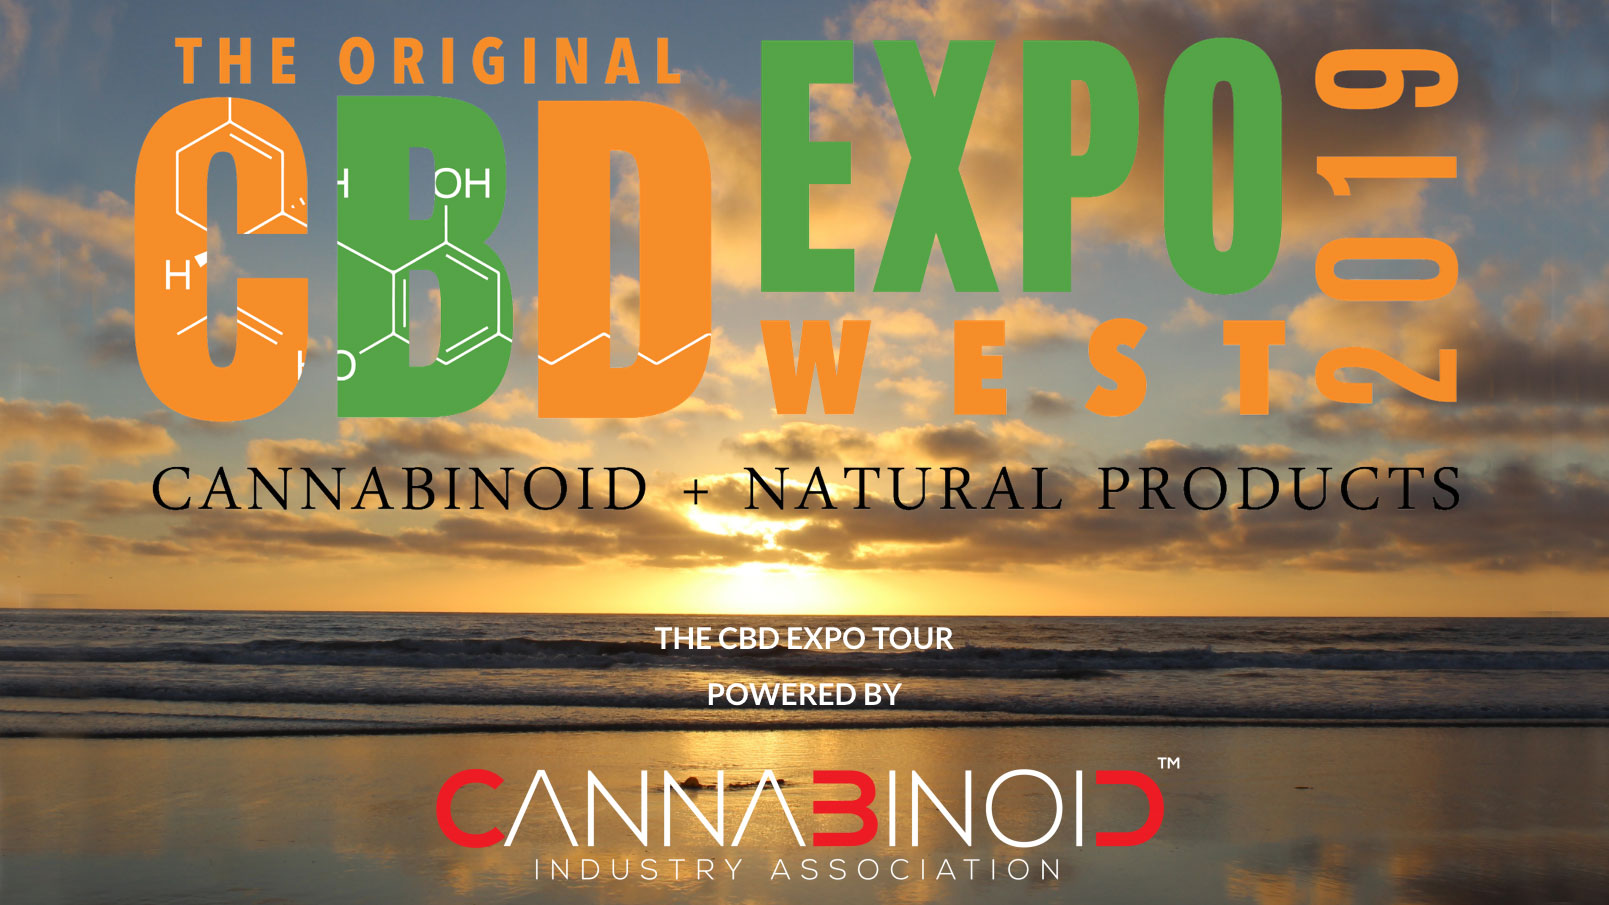 CBD Expo WEST 2019 in San Diego marks the finale of the CBD Expo Tour this year. The conference bridges two industries: cannabinoids and natural products.